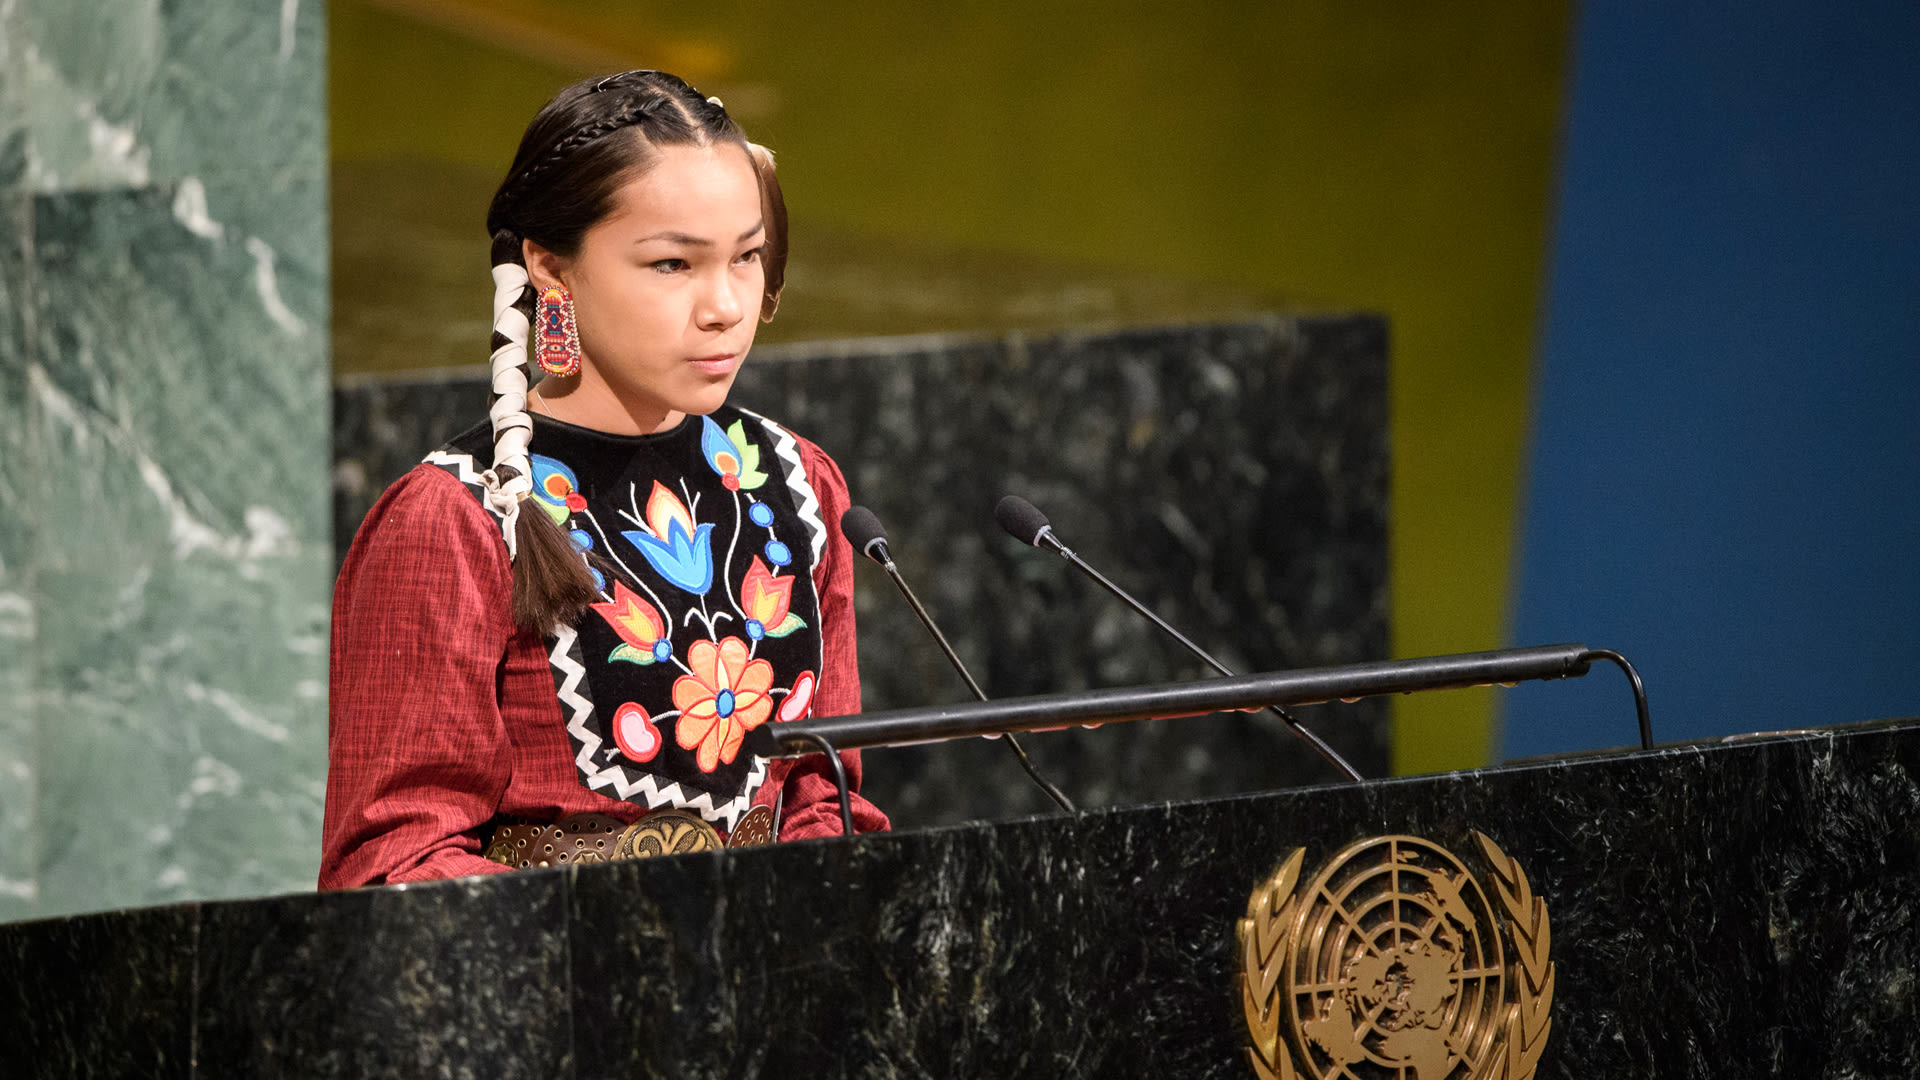 If Greta Thunberg inspires you, you’ll love these 4 teen climate activists too